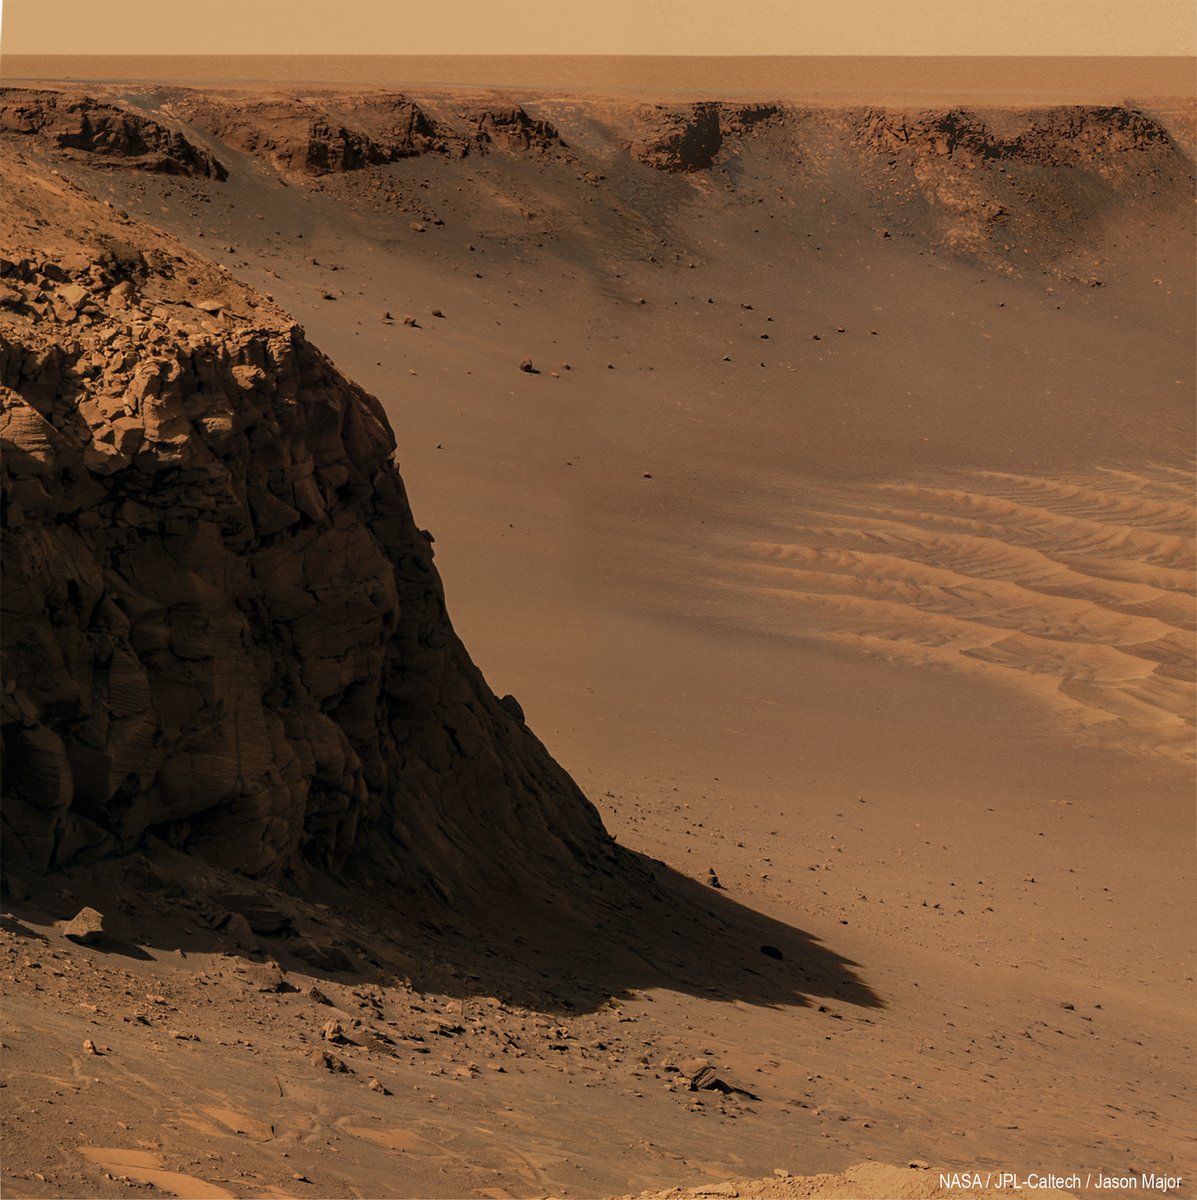 A view of the ~15-meter-high 'Cape St. Mary' layered outcrop located on the rocky western edge of the 730-meter-wide Victoria Crater on Mars, imaged by NASA's Opportunity rover on October 31, 2006 #OTD. Mosaic of pancam images adjusted to approximate natural color.